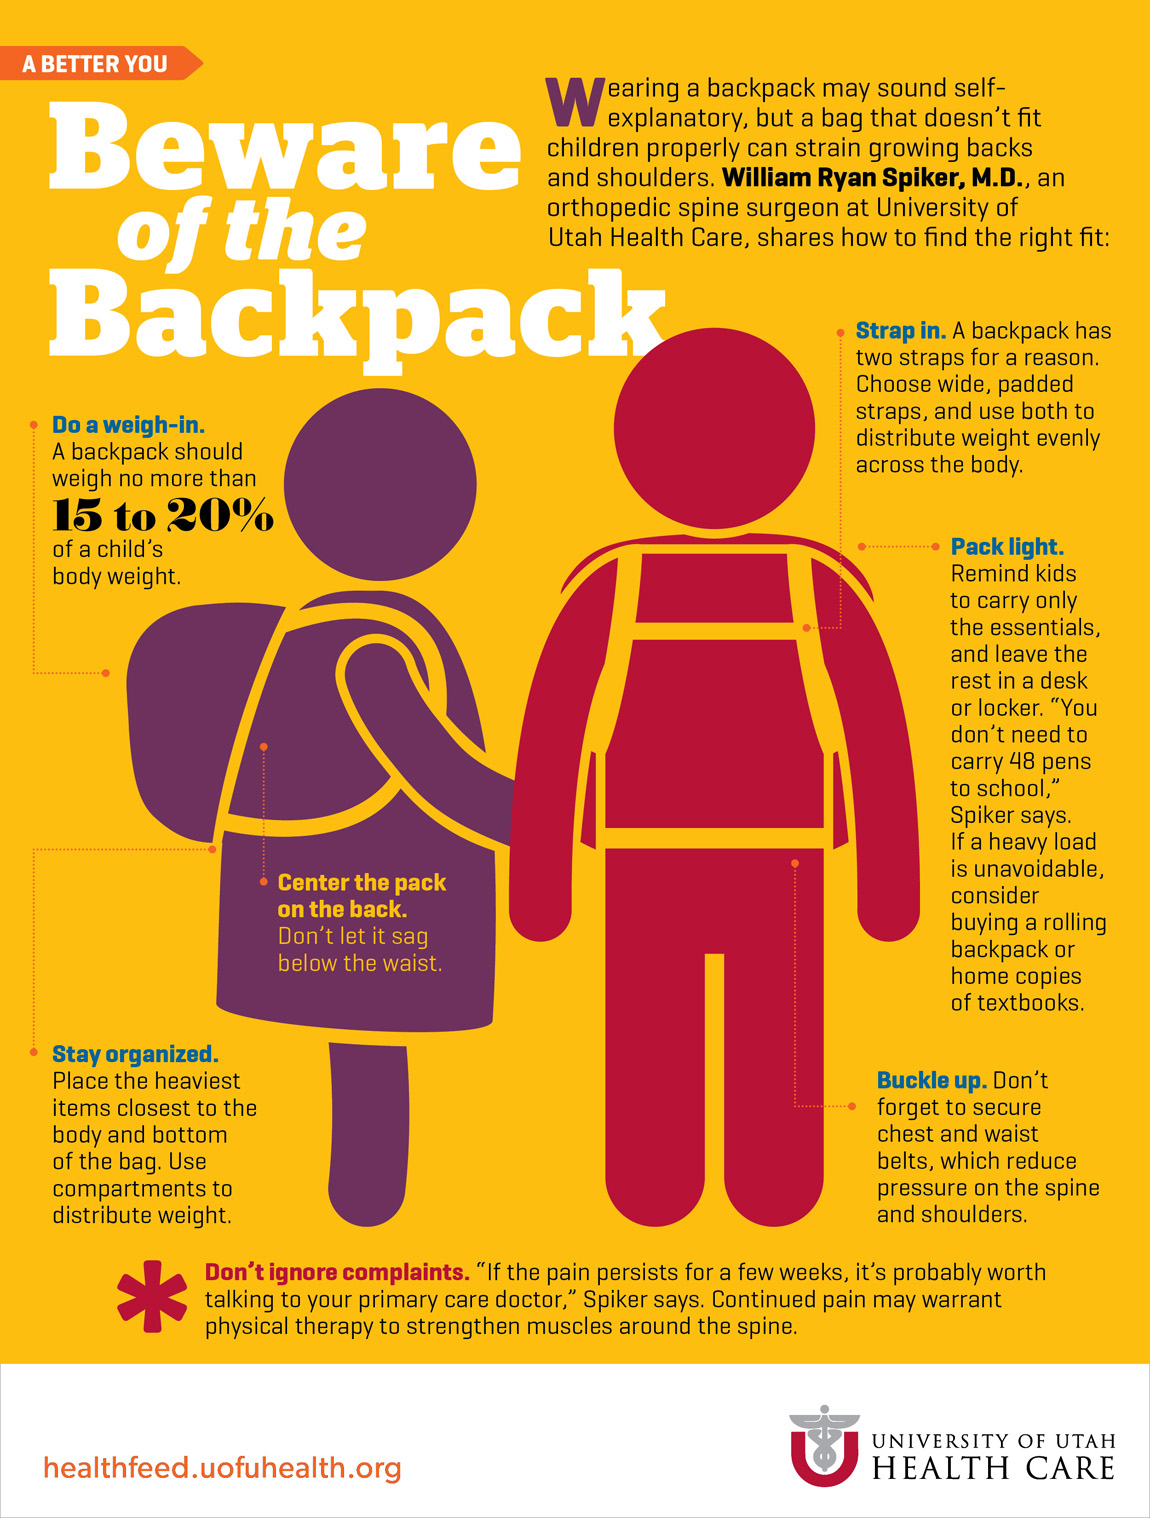 Does your kid know how to wear a backpack correctly? Check out the tips on this infographic.